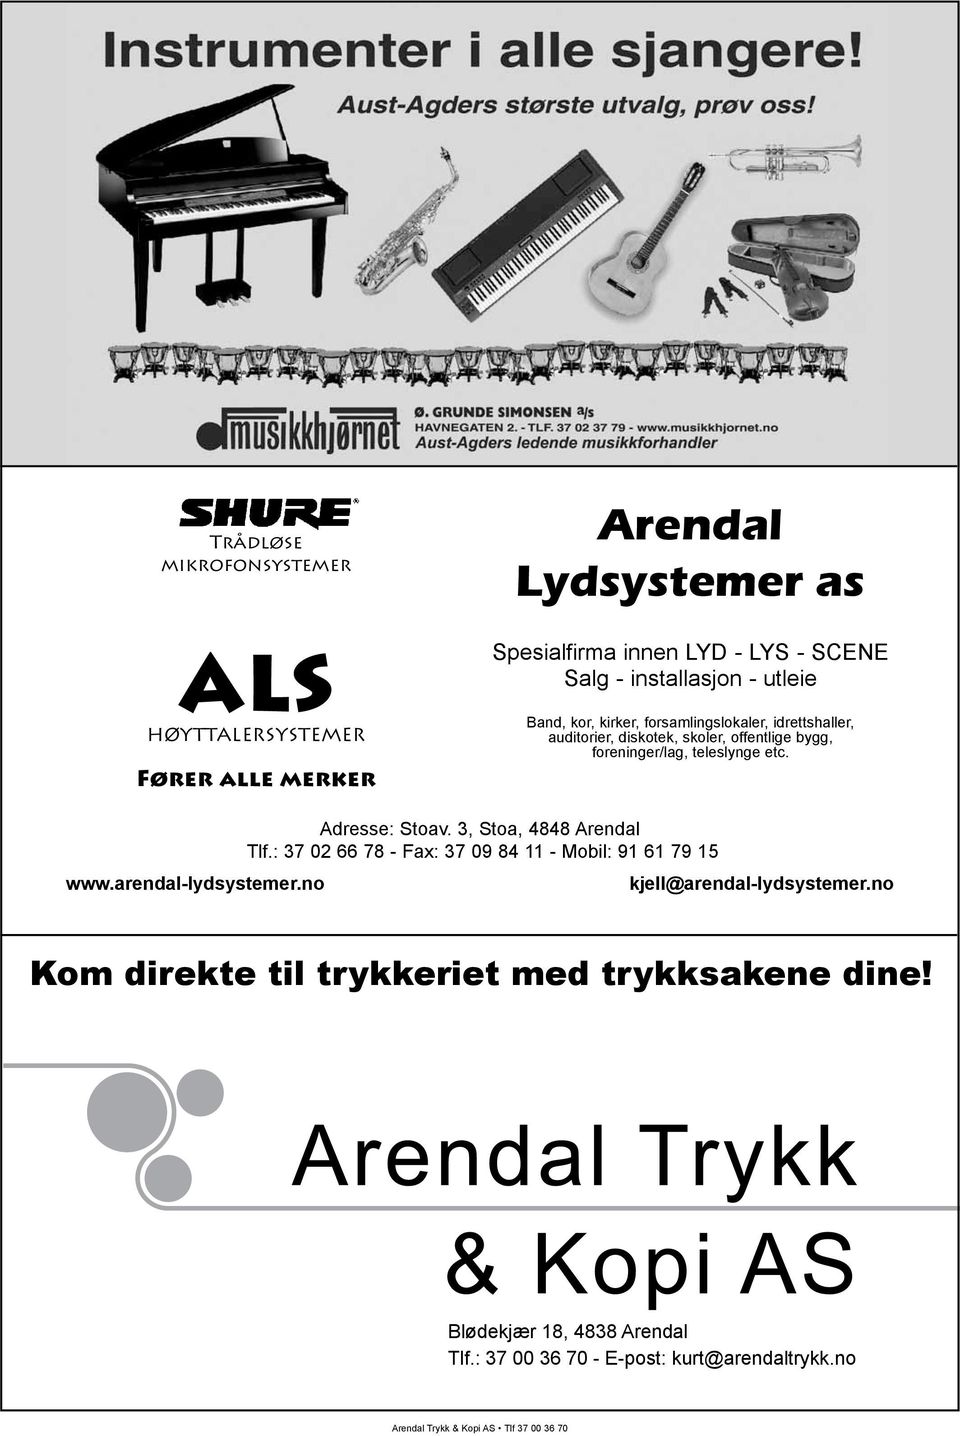 arendal-lydsystemer.no Adresse: Stoav. 3, Stoa, 4848 Arendal Tlf.: 37 02 66 78 - Fax: 37 09 84 11 - Mobil: 91 61 79 15 kjell@arendal-lydsystemer.